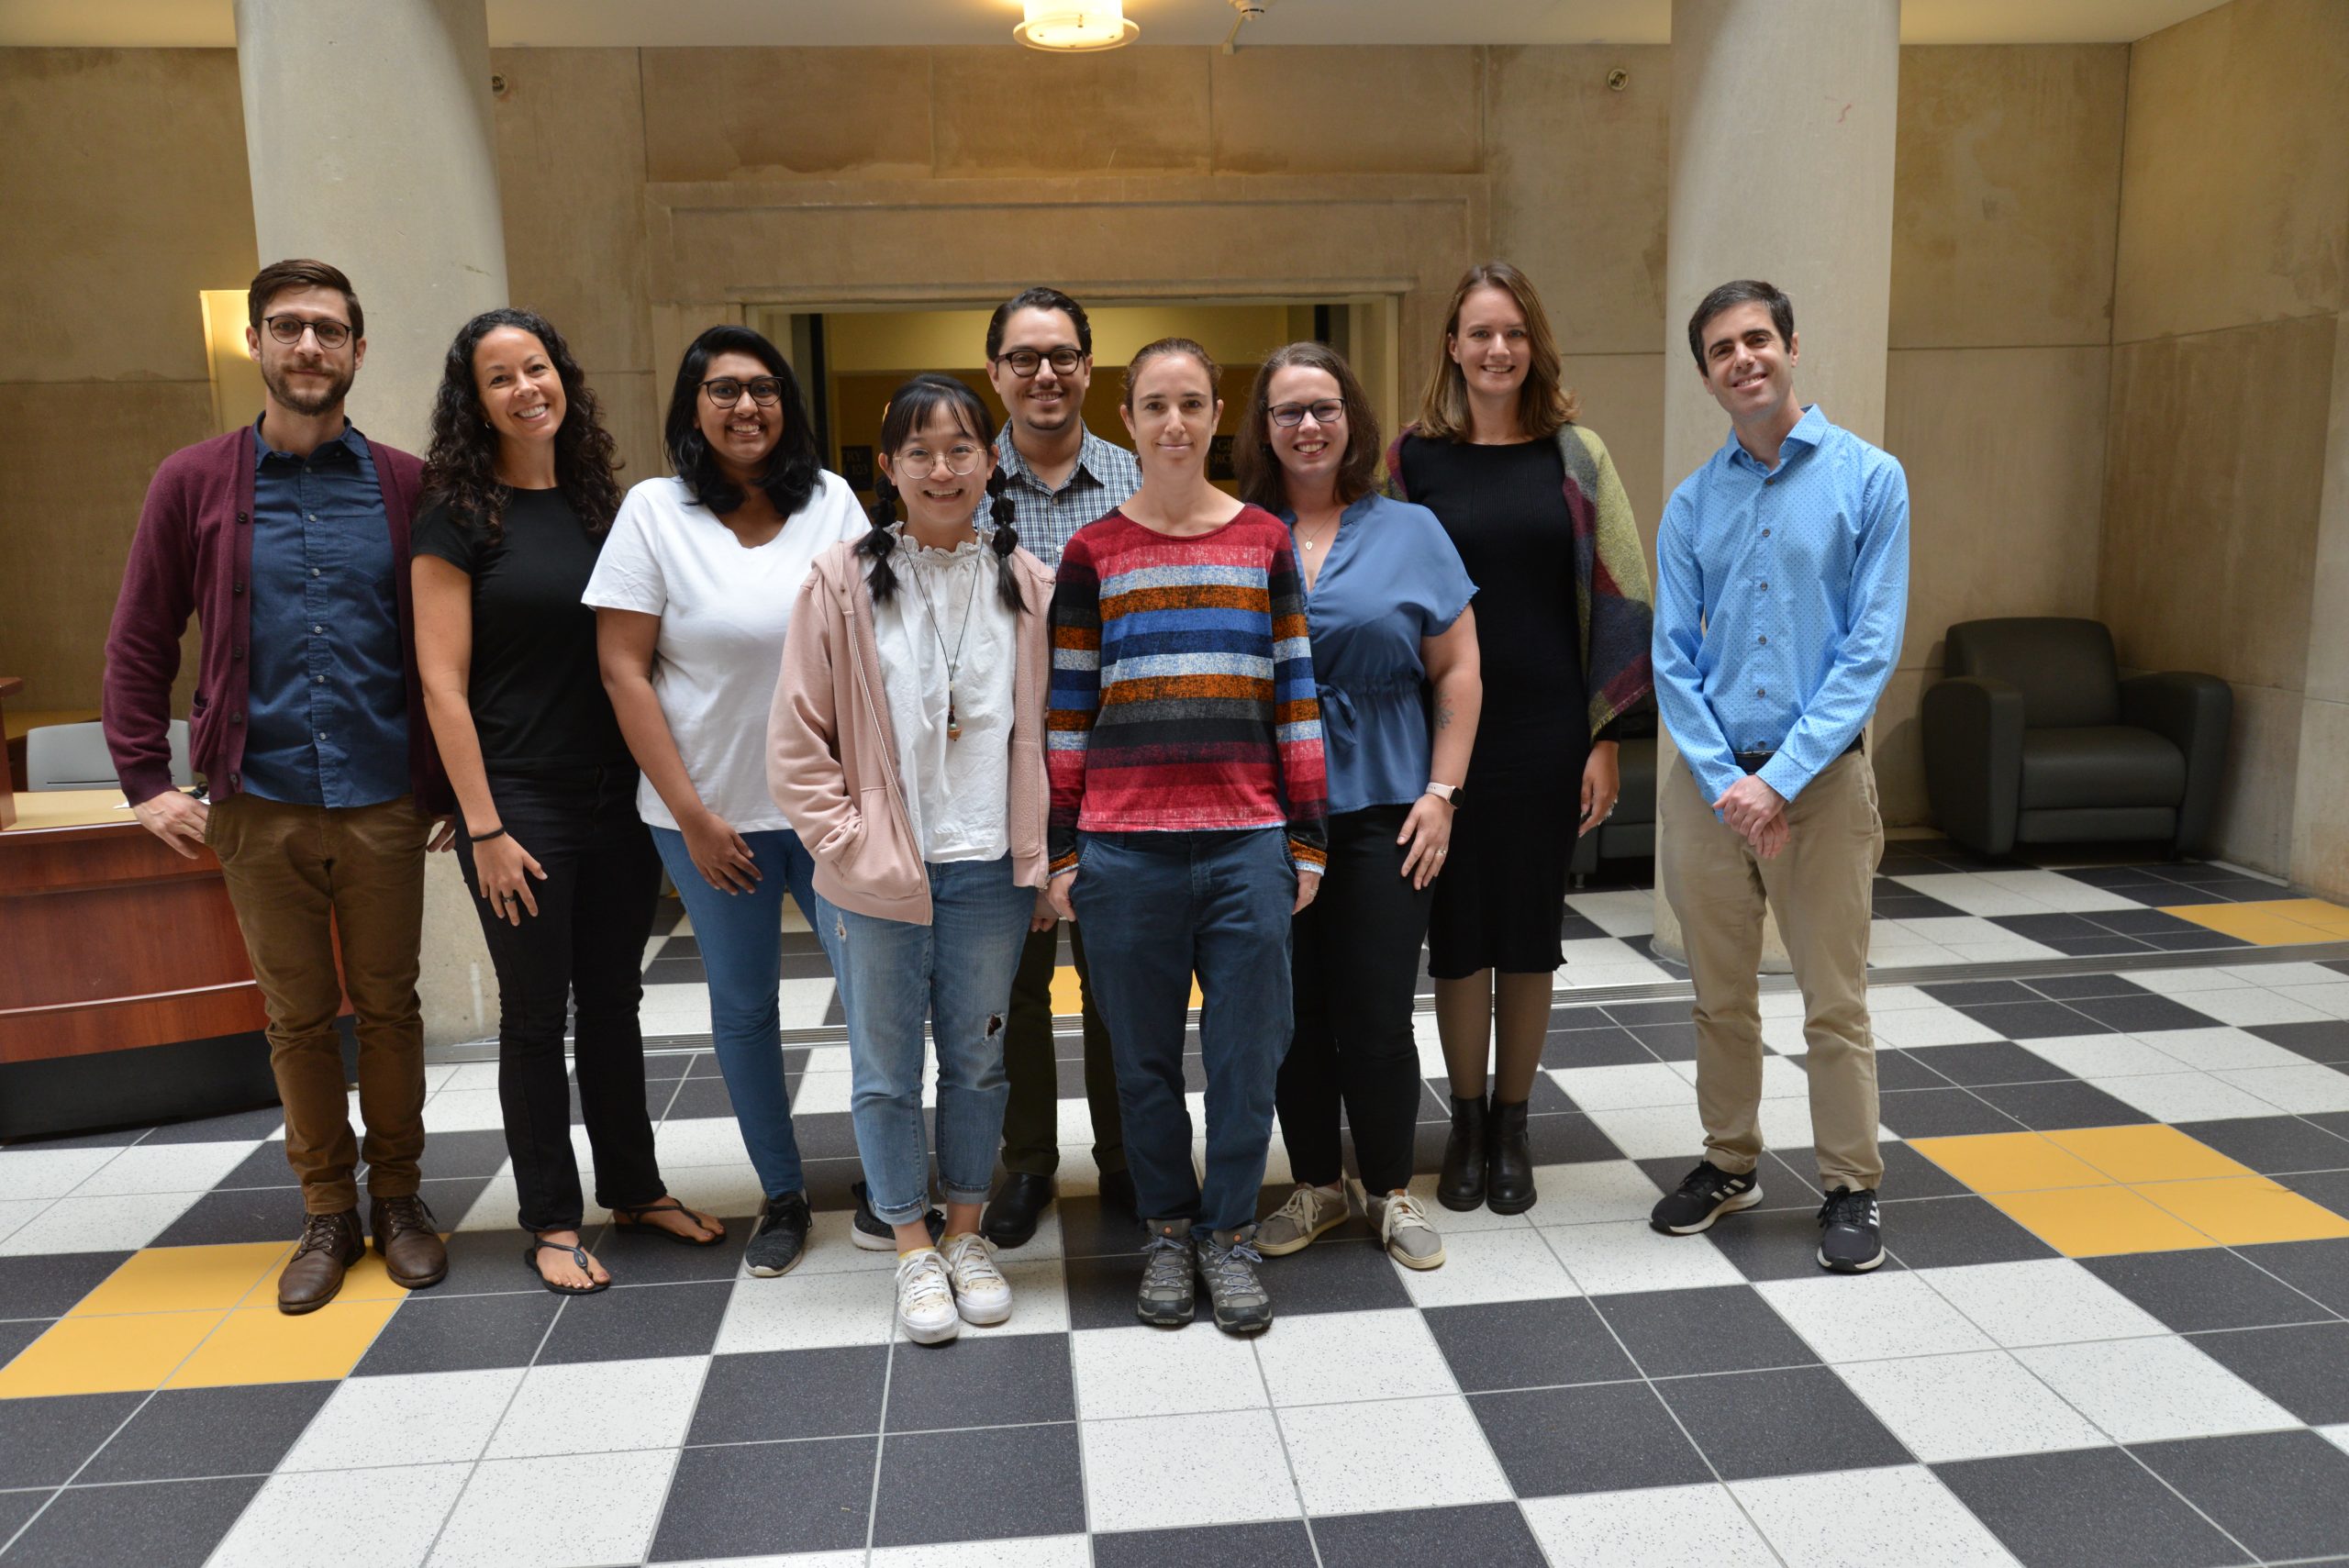 Lab to Classroom Research Group members standing in the Neag school atrium